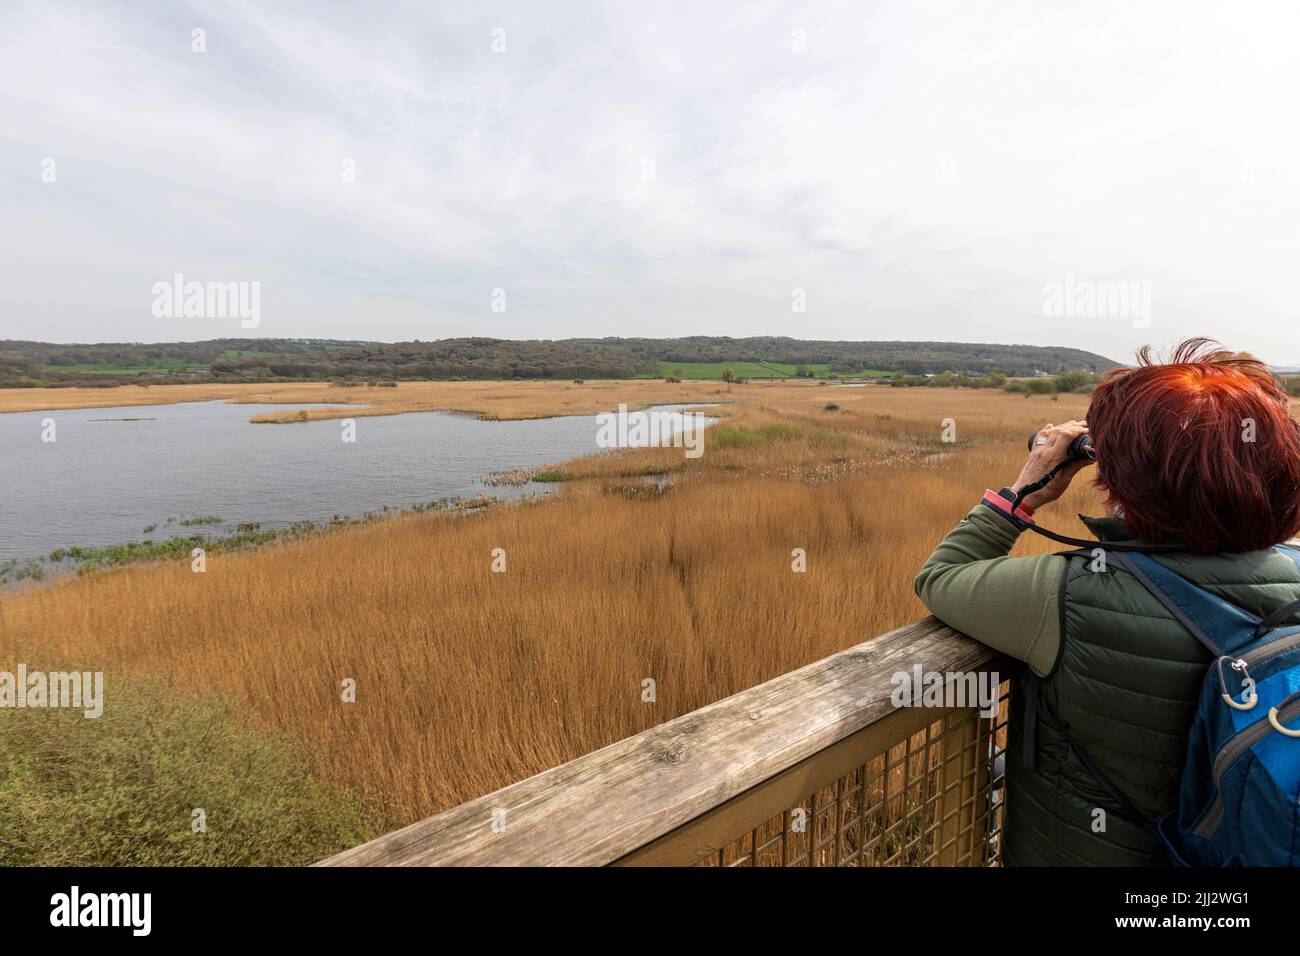 Woman in elevated viewing platform known as the 'Skytower'. Leighton Moss RSPB reserve, Lancashire, England, United Kingdom Stock Photo